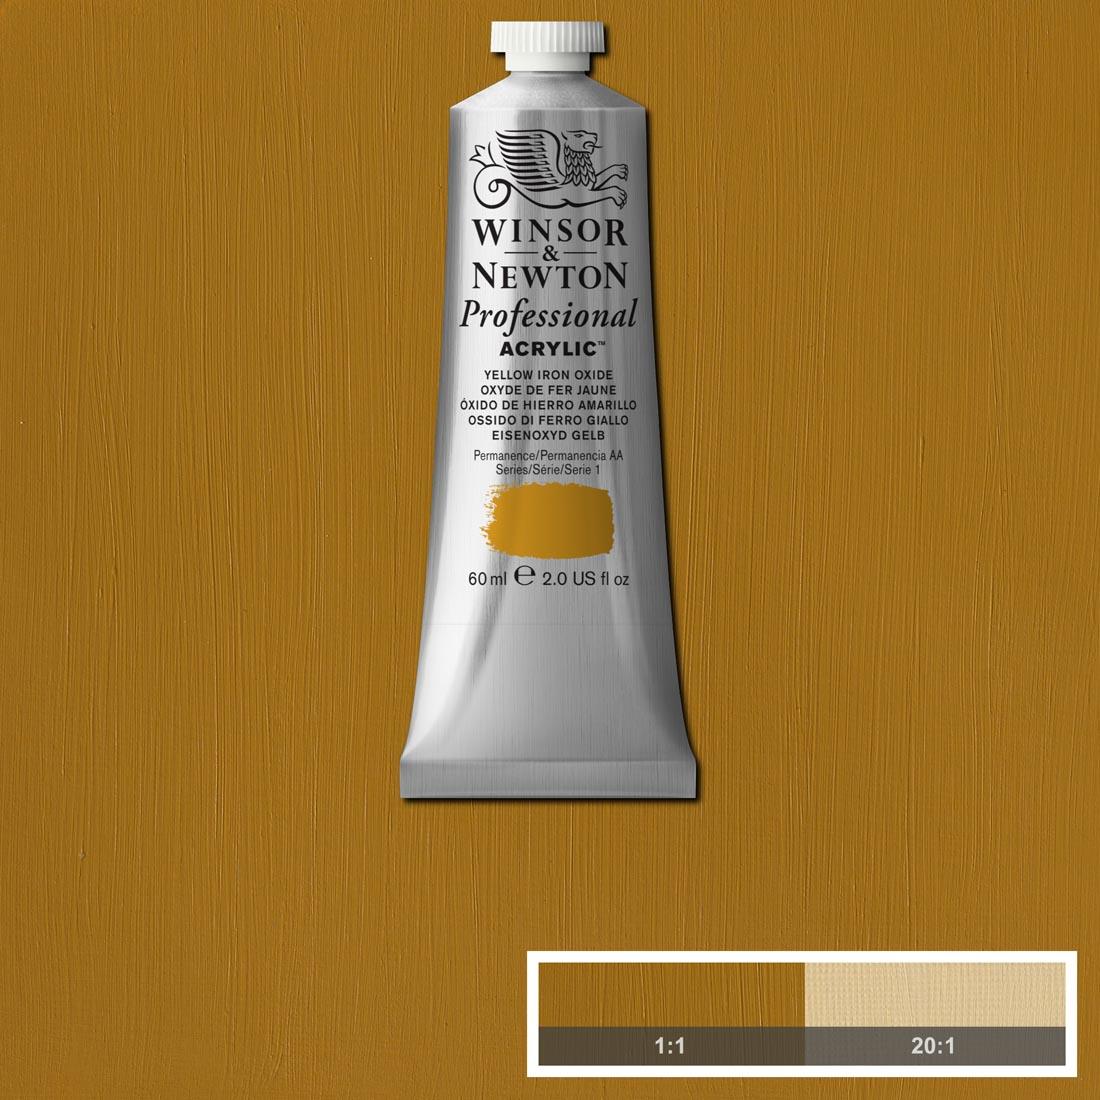 Tube of Yellow Iron Oxide Winsor and Newton Professional Acrylic with paint swatch in the background